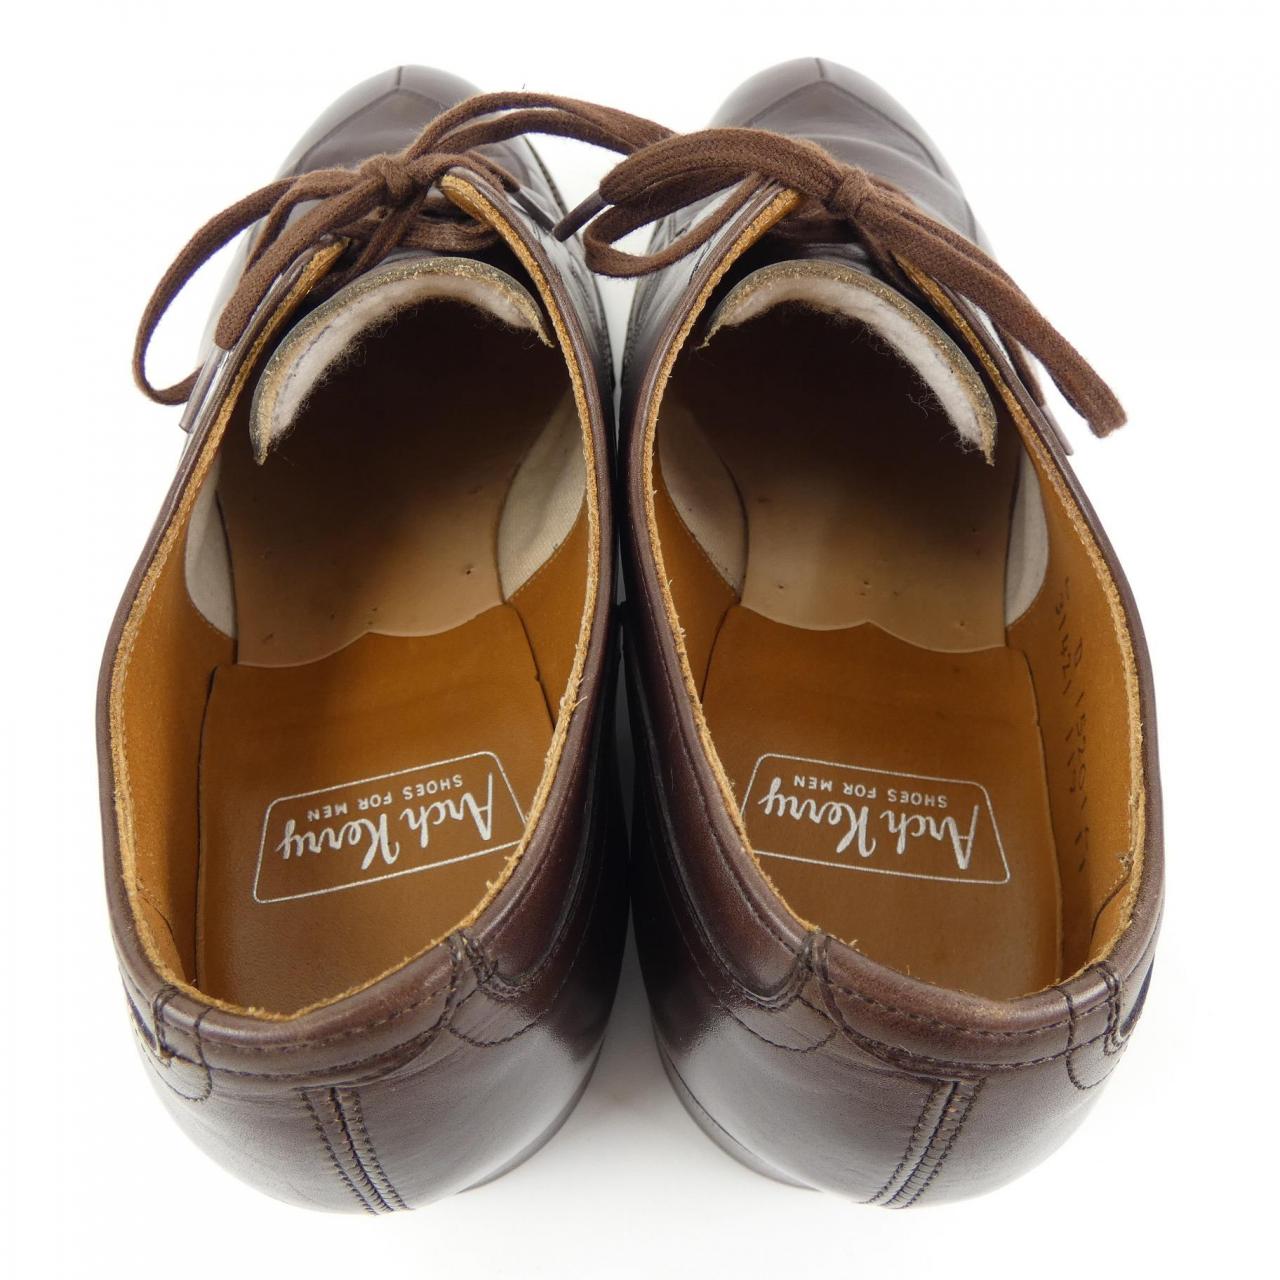 ARCHKERRY dress shoes